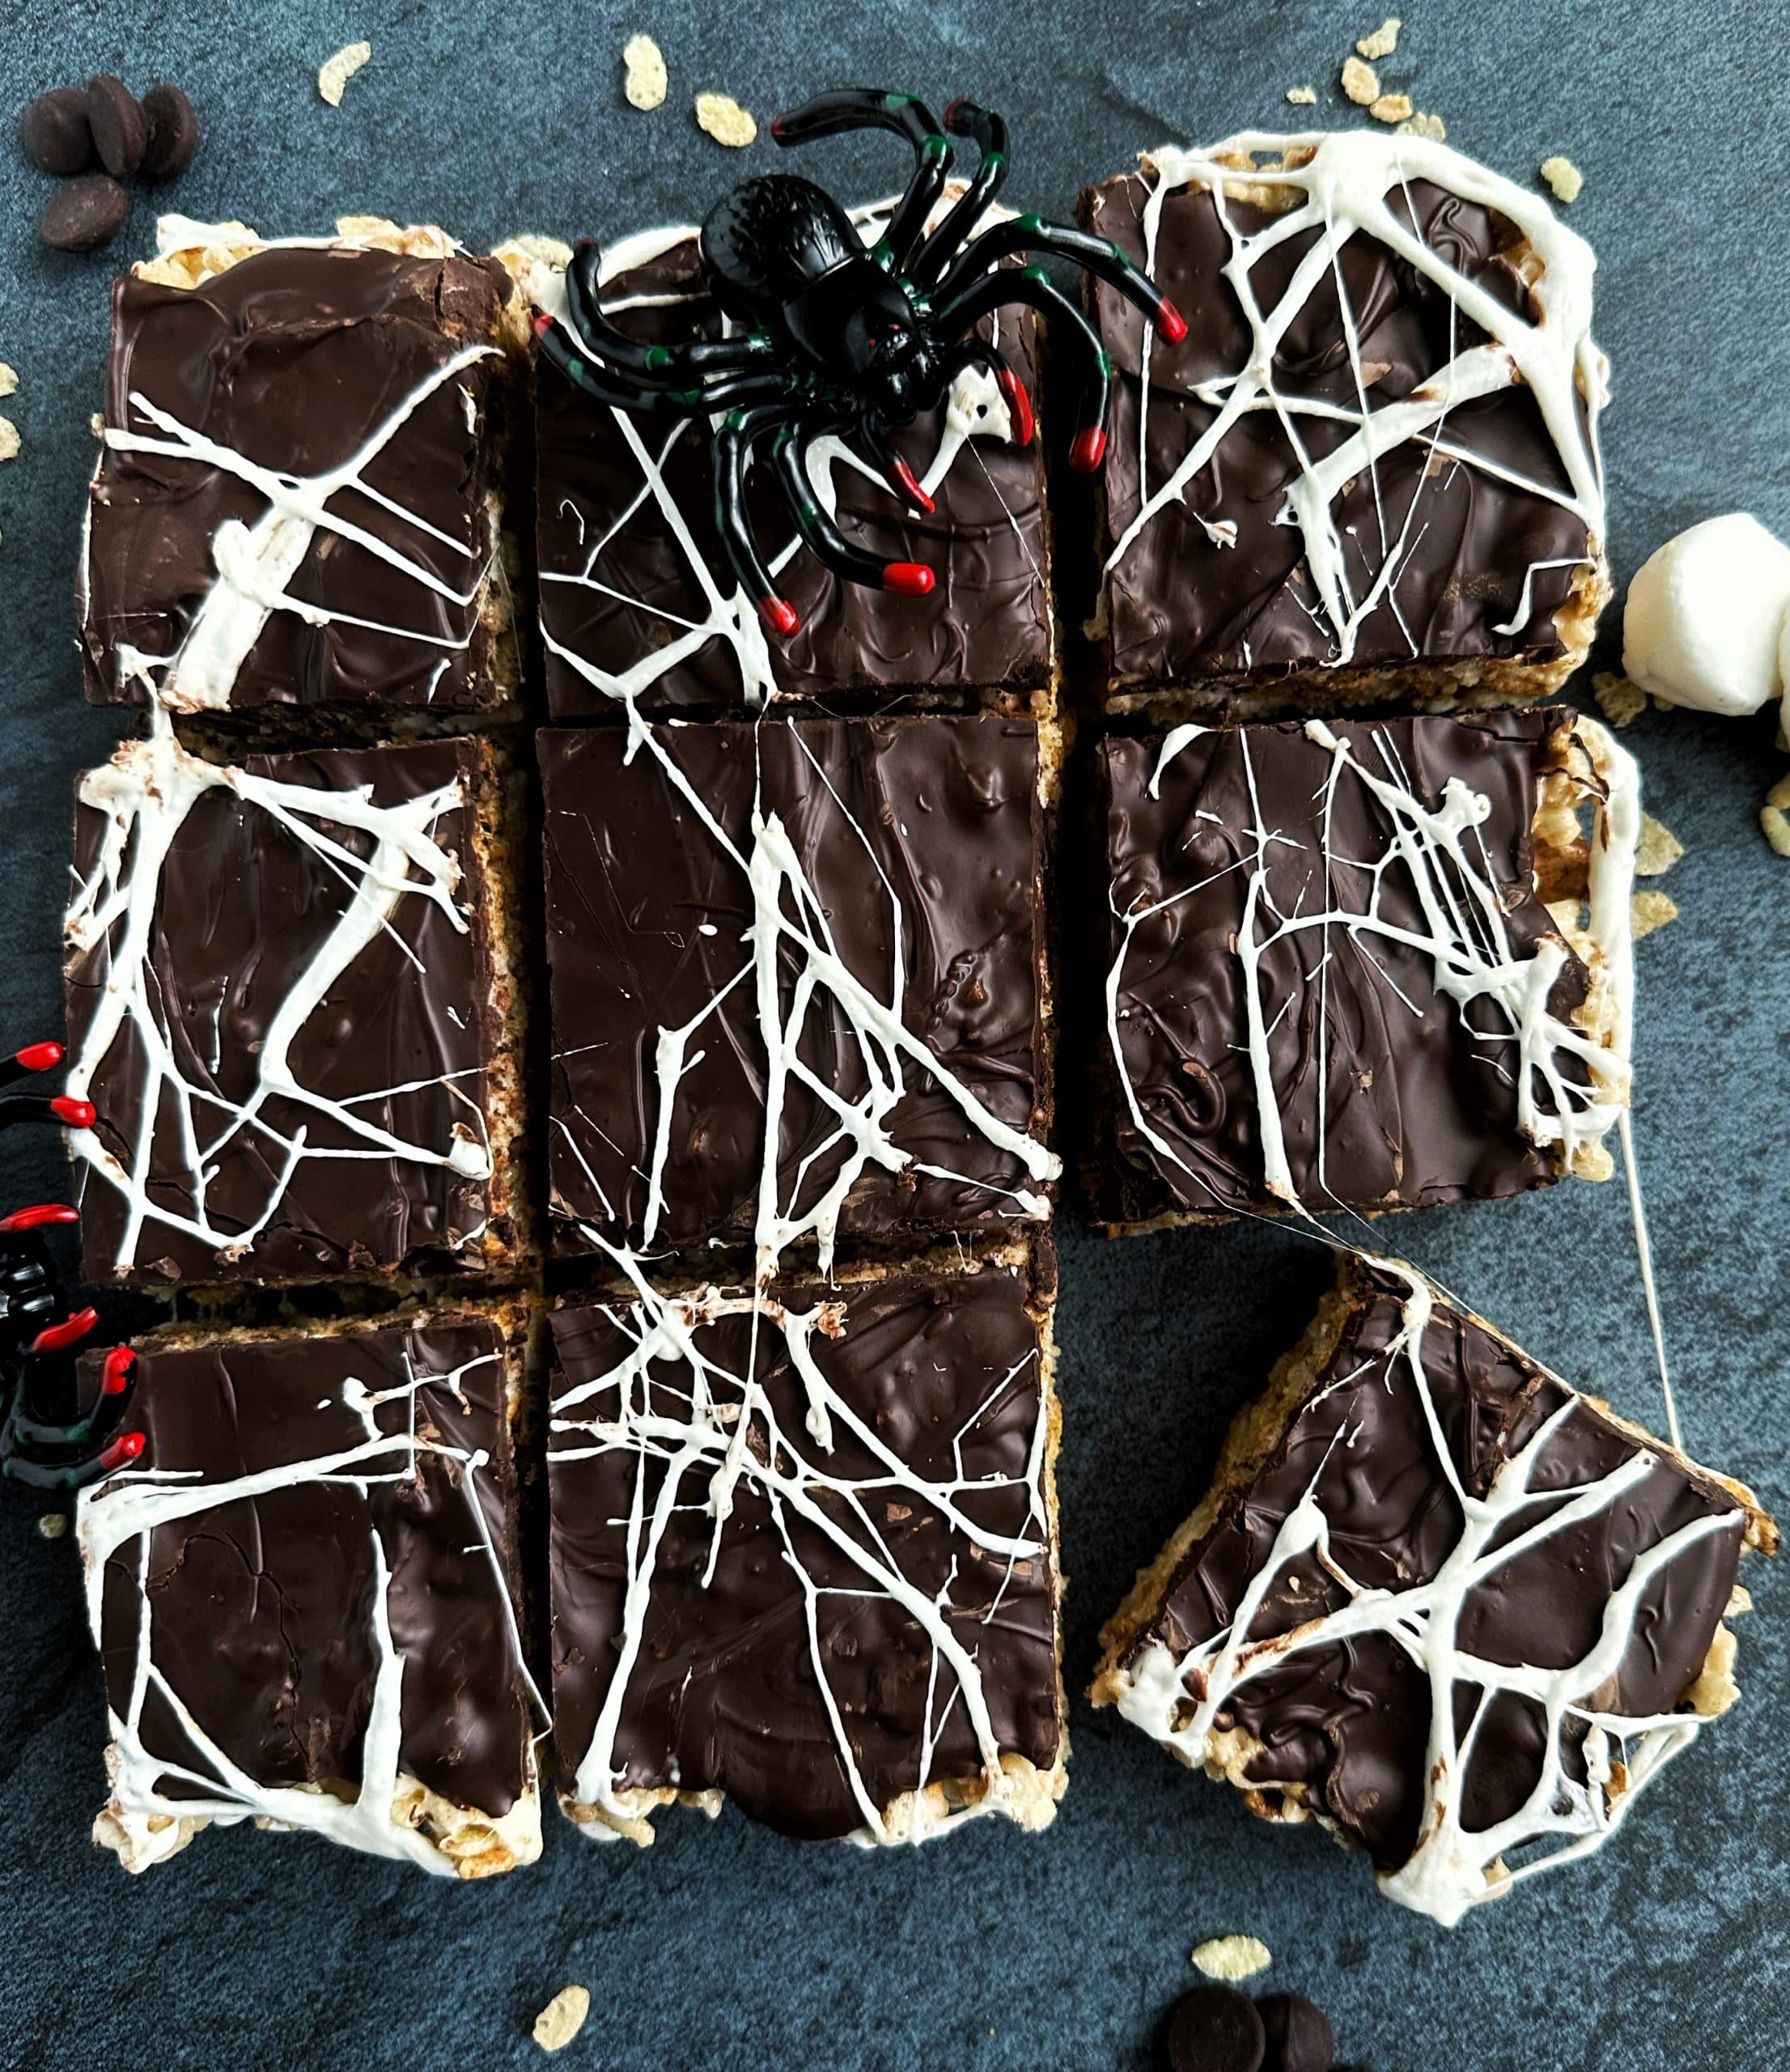 A tray of S'mores flavored Rice Krispie Treats decorated with marshmallow "spider webs" on top.